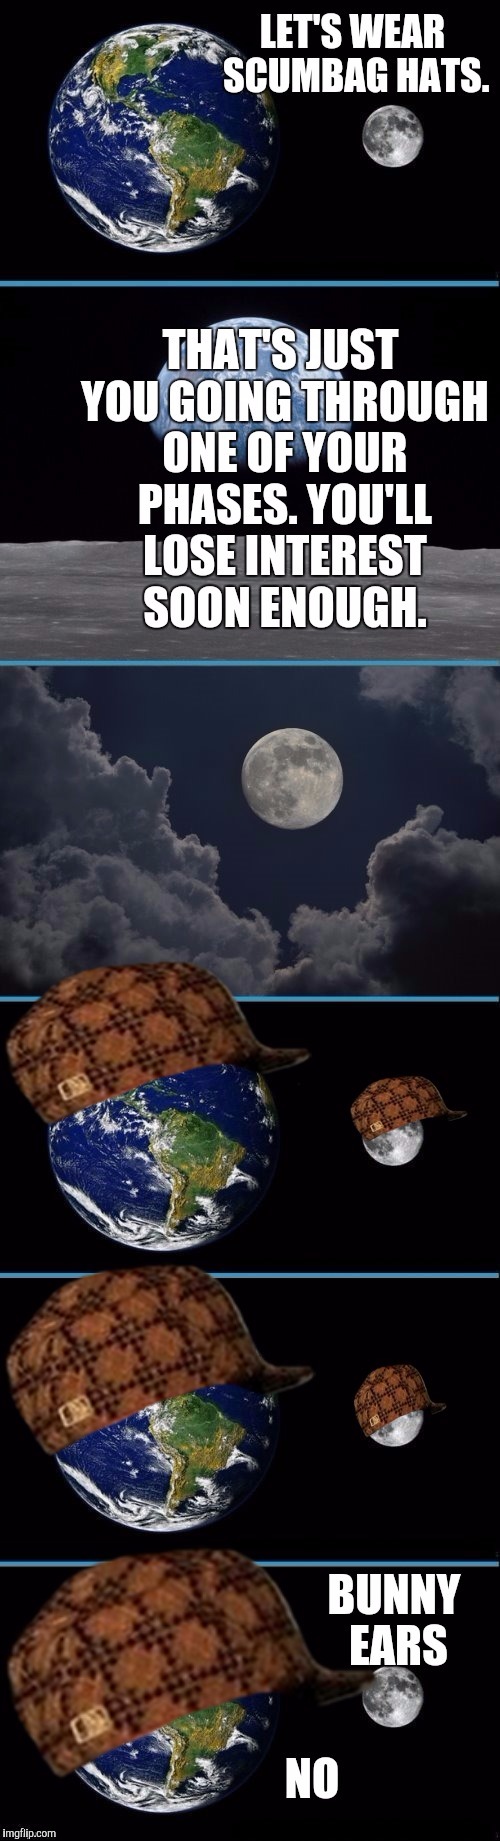 PHASES OF THE MOON :D | image tagged in funny,scumbag,humor,astronomy,memes,moon | made w/ Imgflip meme maker